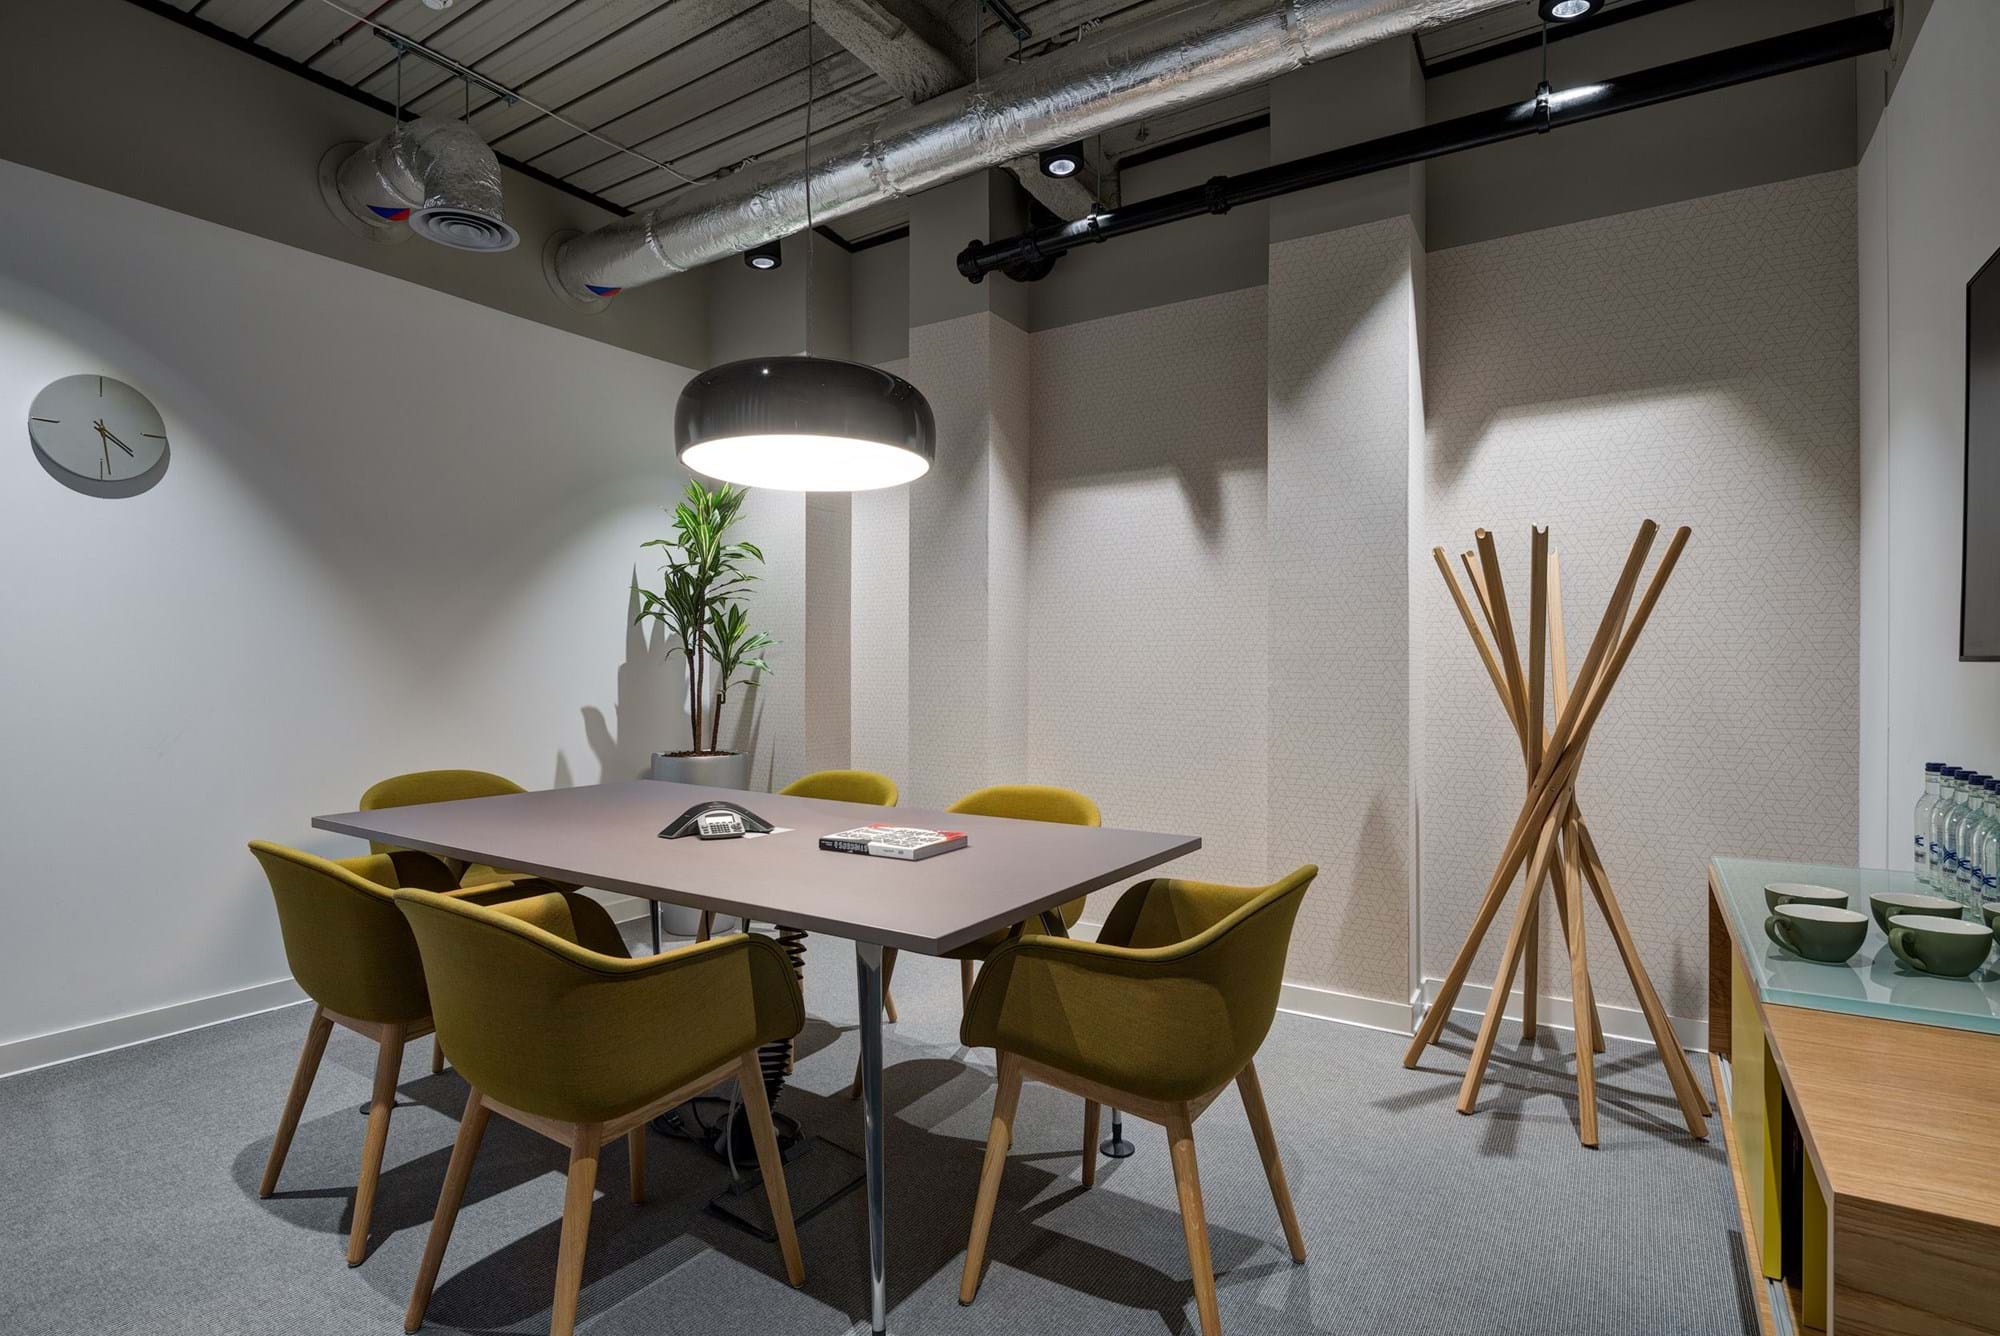 Modus Workspace office design, fit out and refurbishment - Spaces - Moorgate, London - Spaces Moorgate 12 highres sRGB.jpg